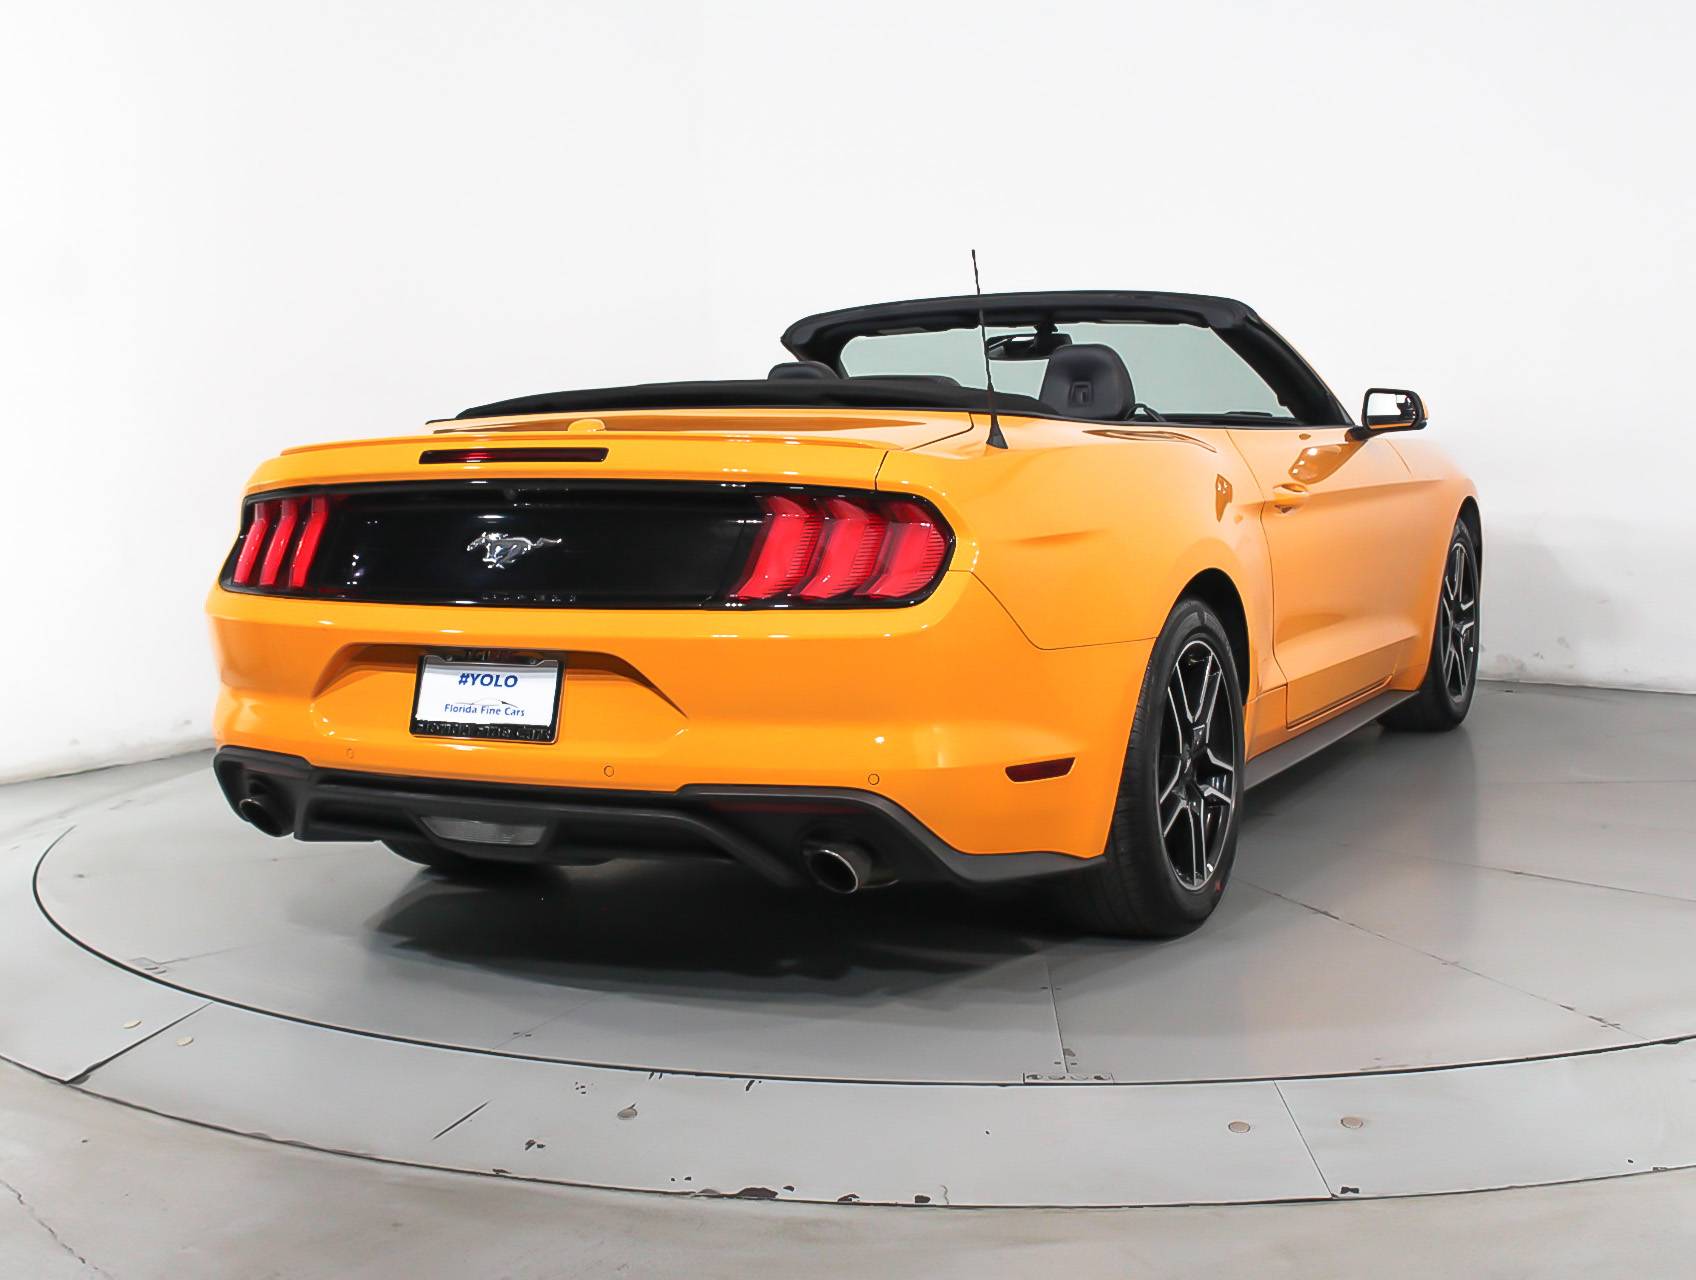 Florida Fine Cars - Used FORD MUSTANG 2018 MIAMI Ecoboost Premium